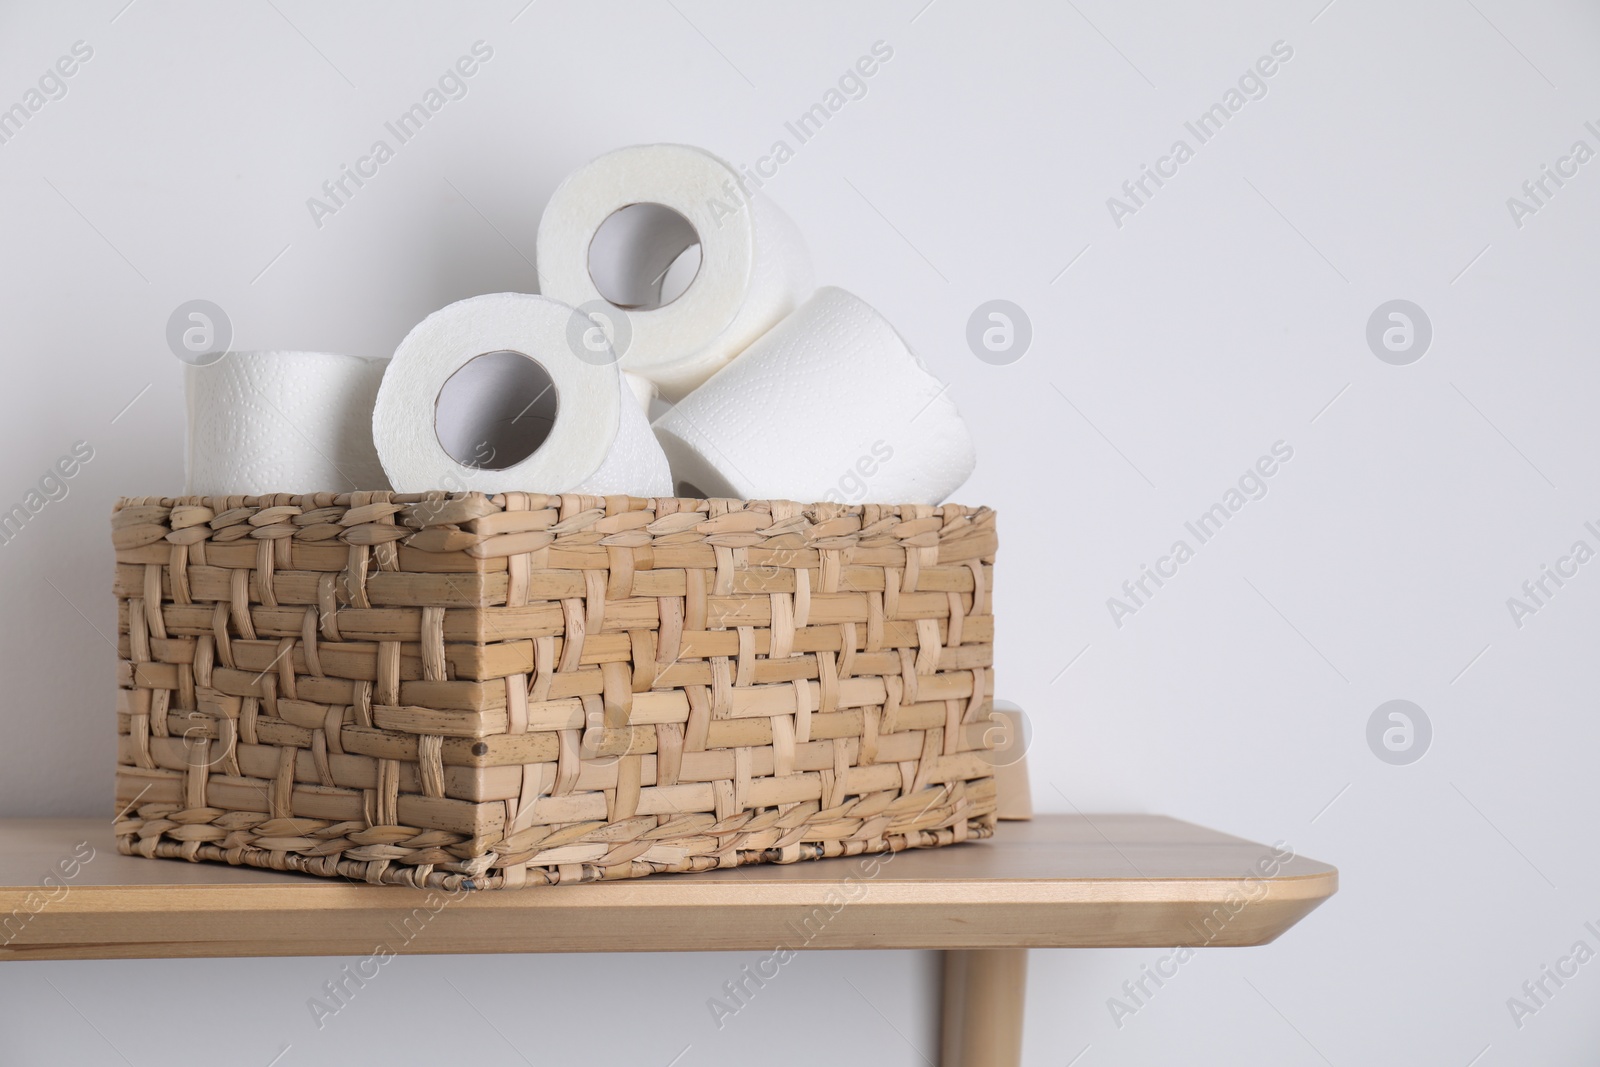 Photo of Toilet paper rolls in wicker basket on wooden table near white wall, space for text